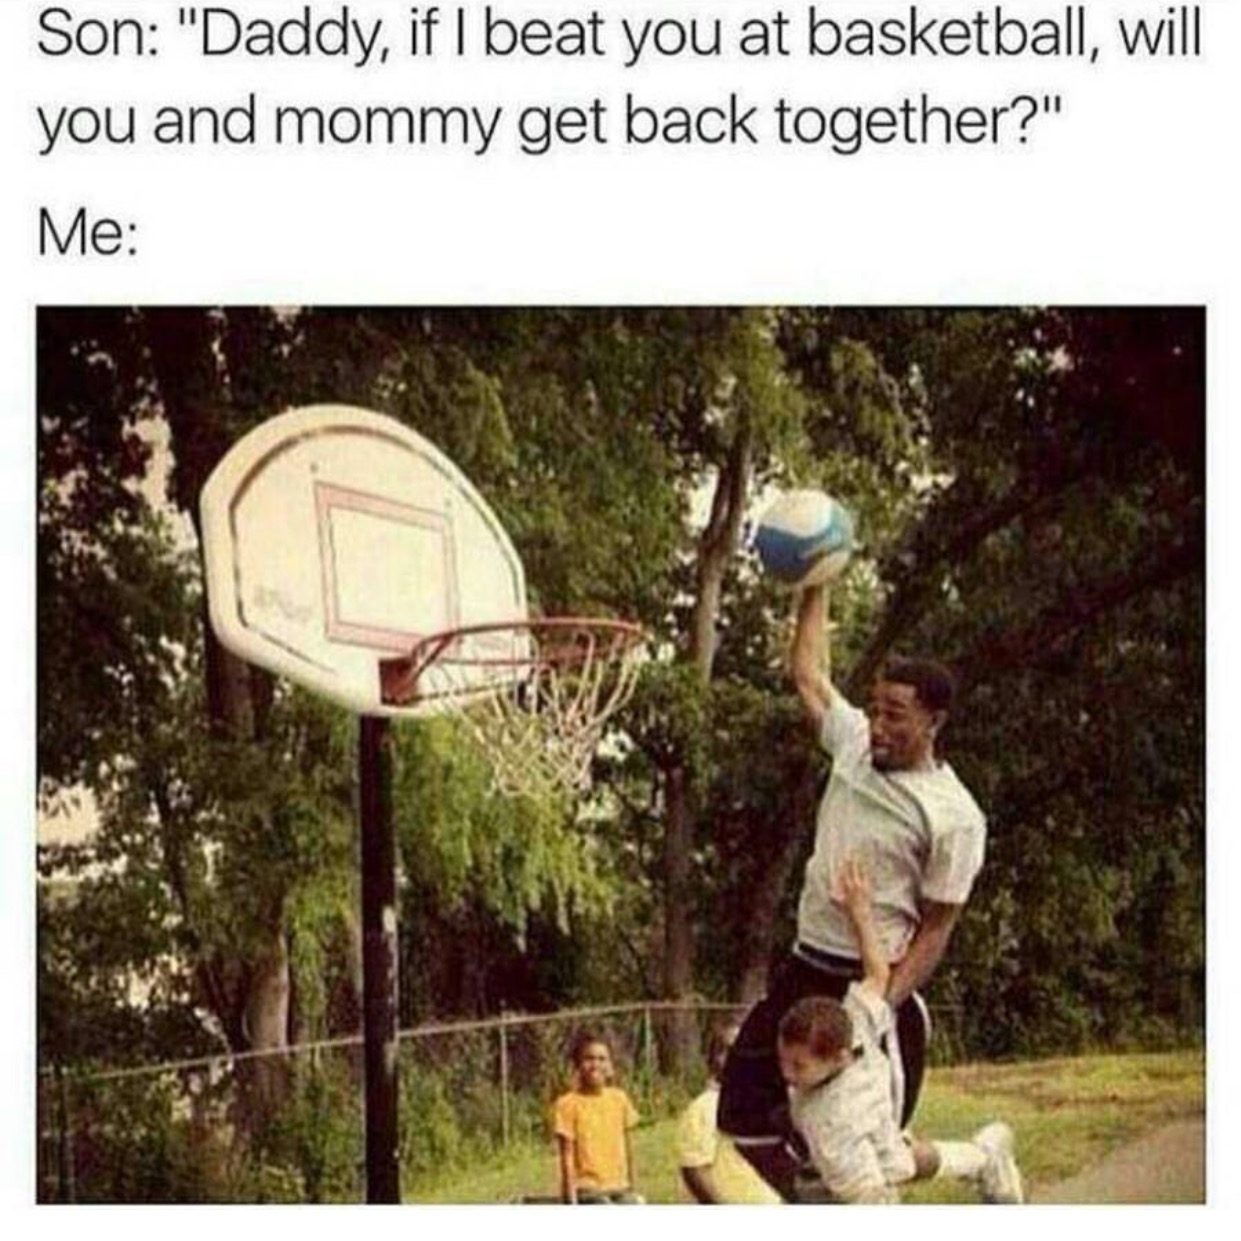 daddy if i beat you in basketball - Son "Daddy, if I beat you at basketball, will you and mommy get back together?" Me